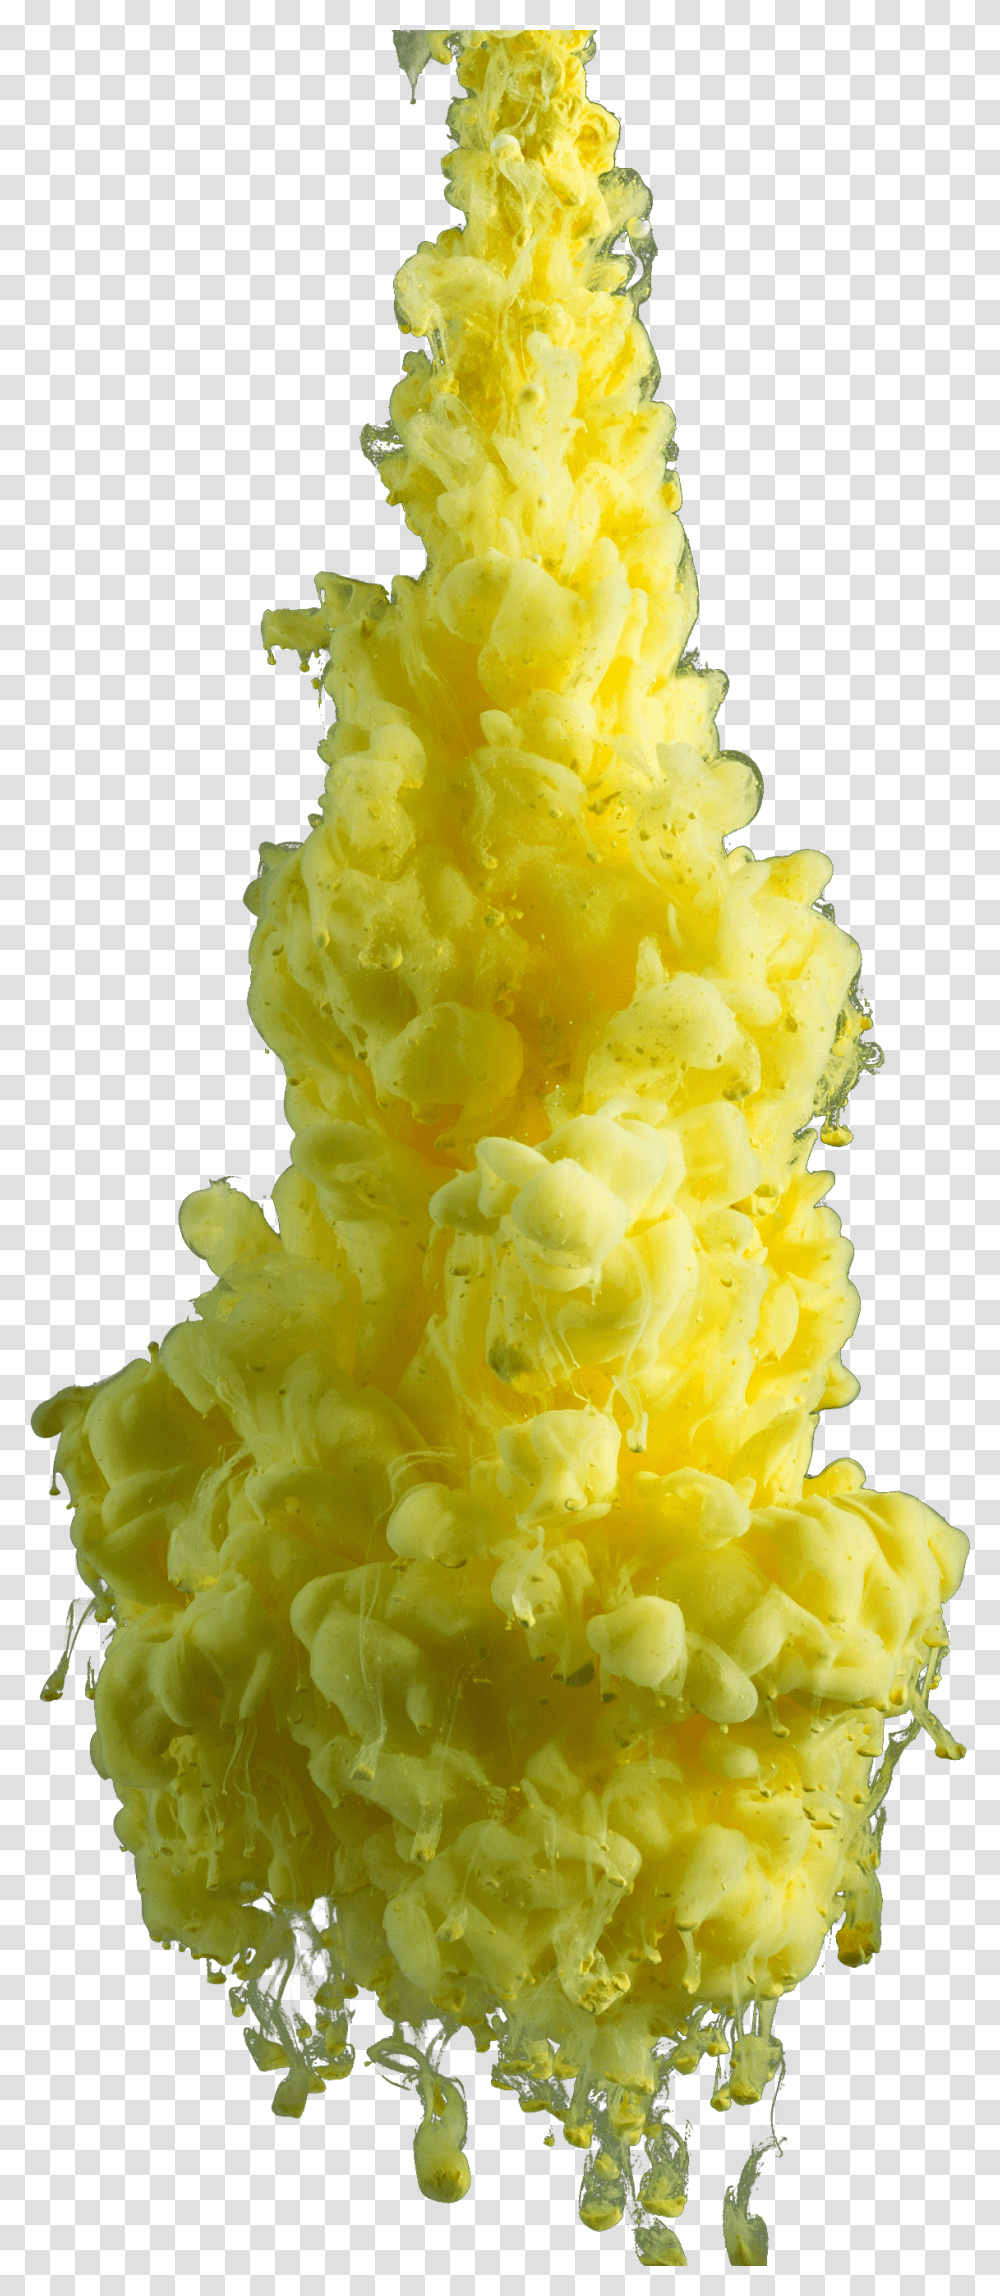 Colored Smoke Hd Quality Colored Smoke Yellow, Pineapple, Fruit, Plant, Food Transparent Png